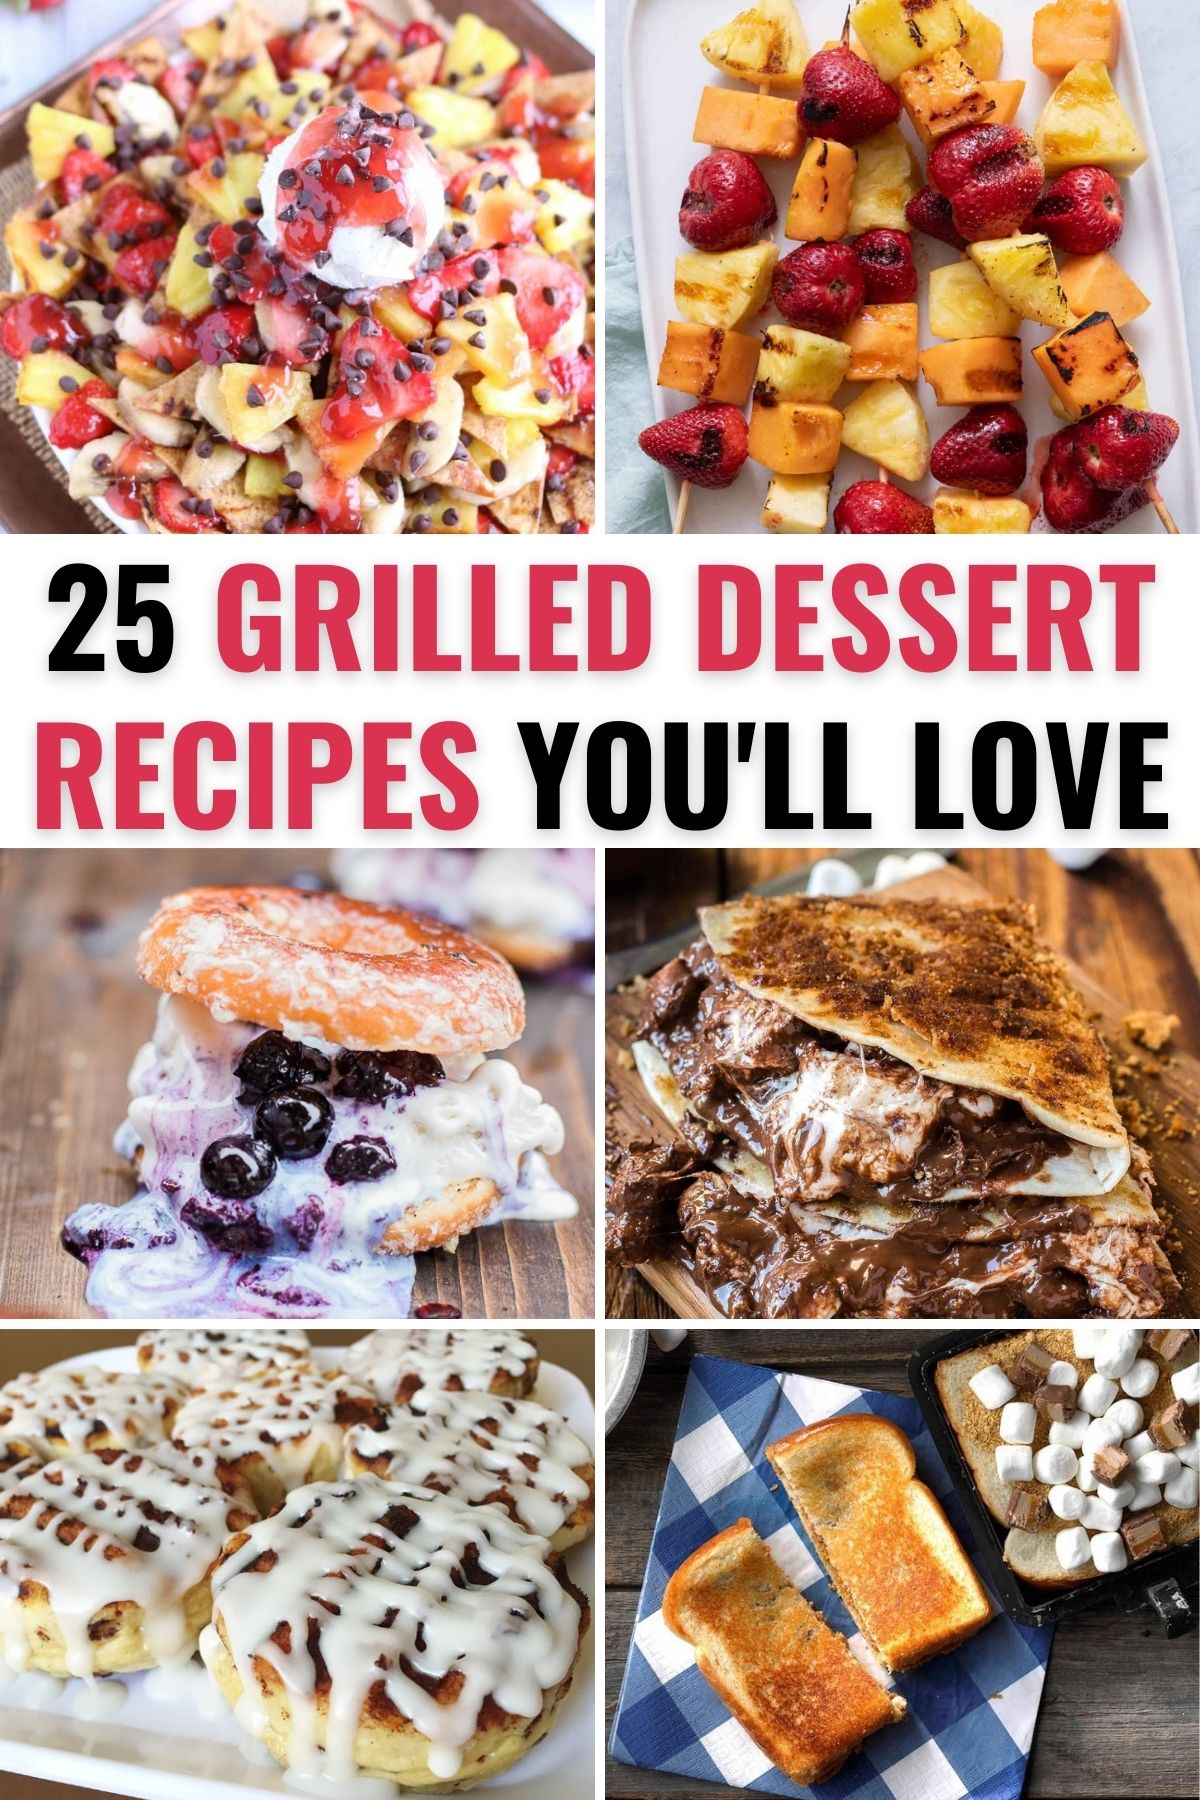 A collection of desserts on the grille recipes